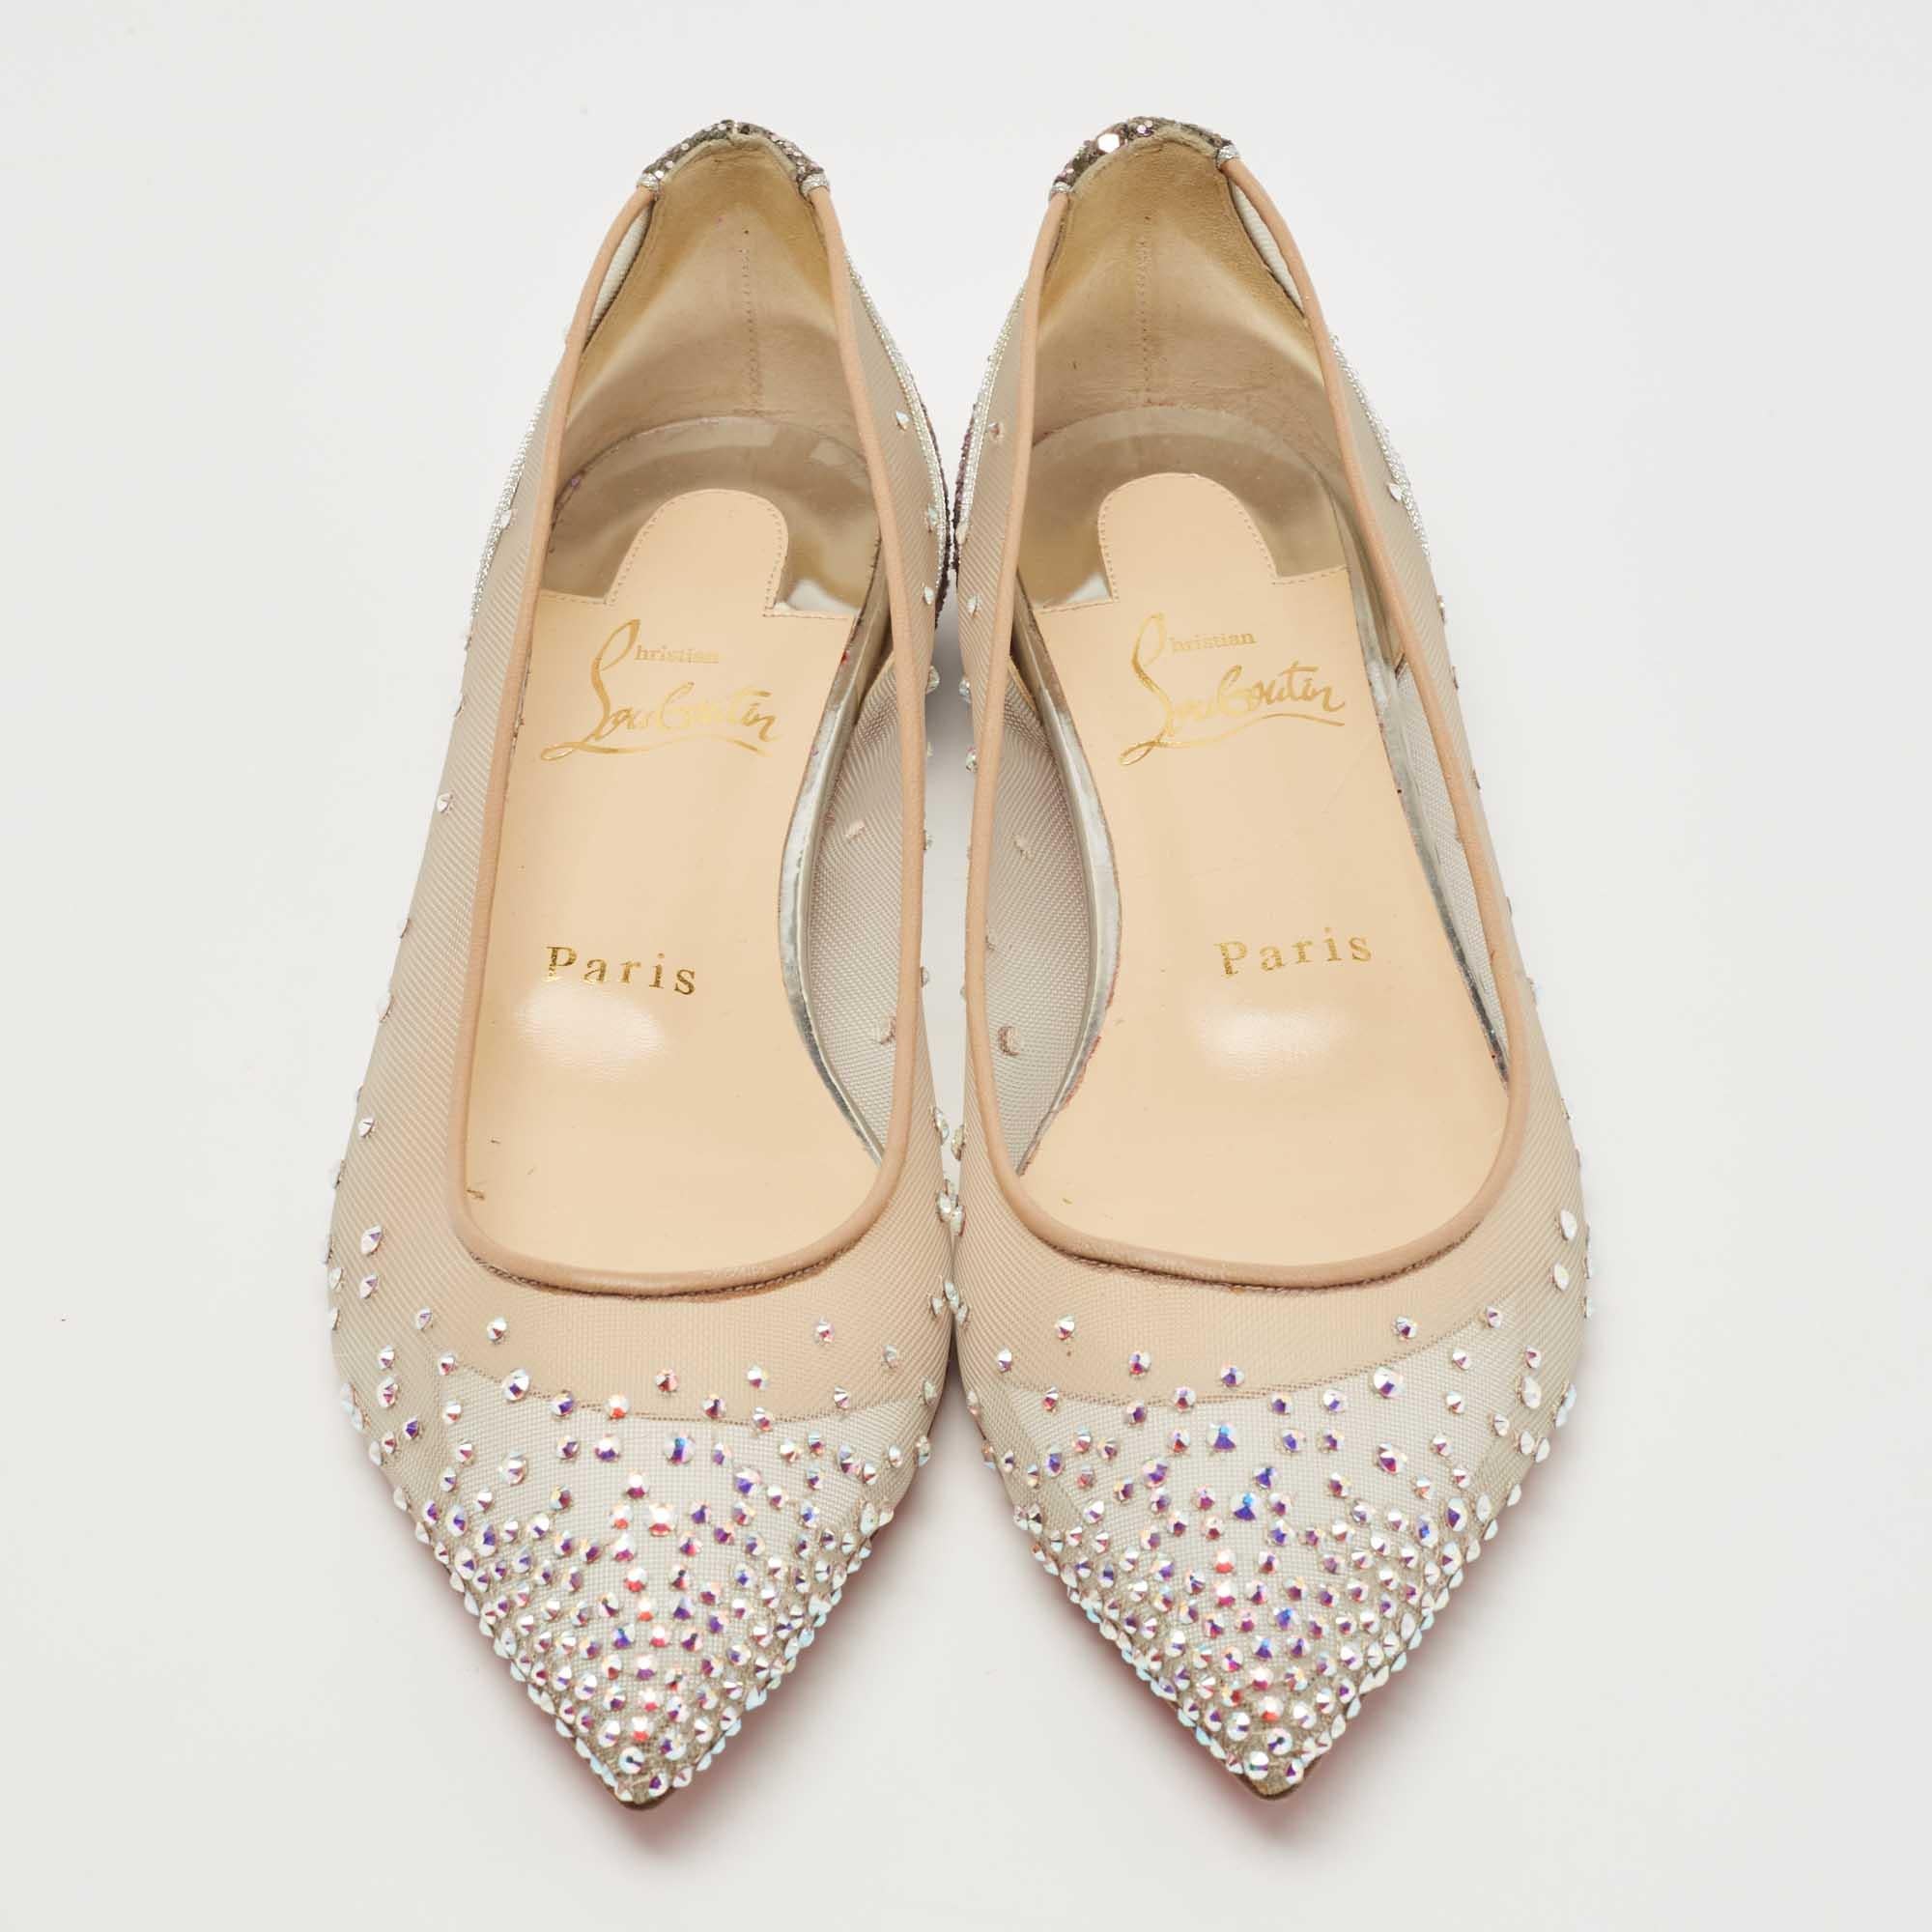 Complete your look by adding these Christian Louboutin ballet flats to your lovely wardrobe. They are crafted skilfully to grant the perfect fit and style.

